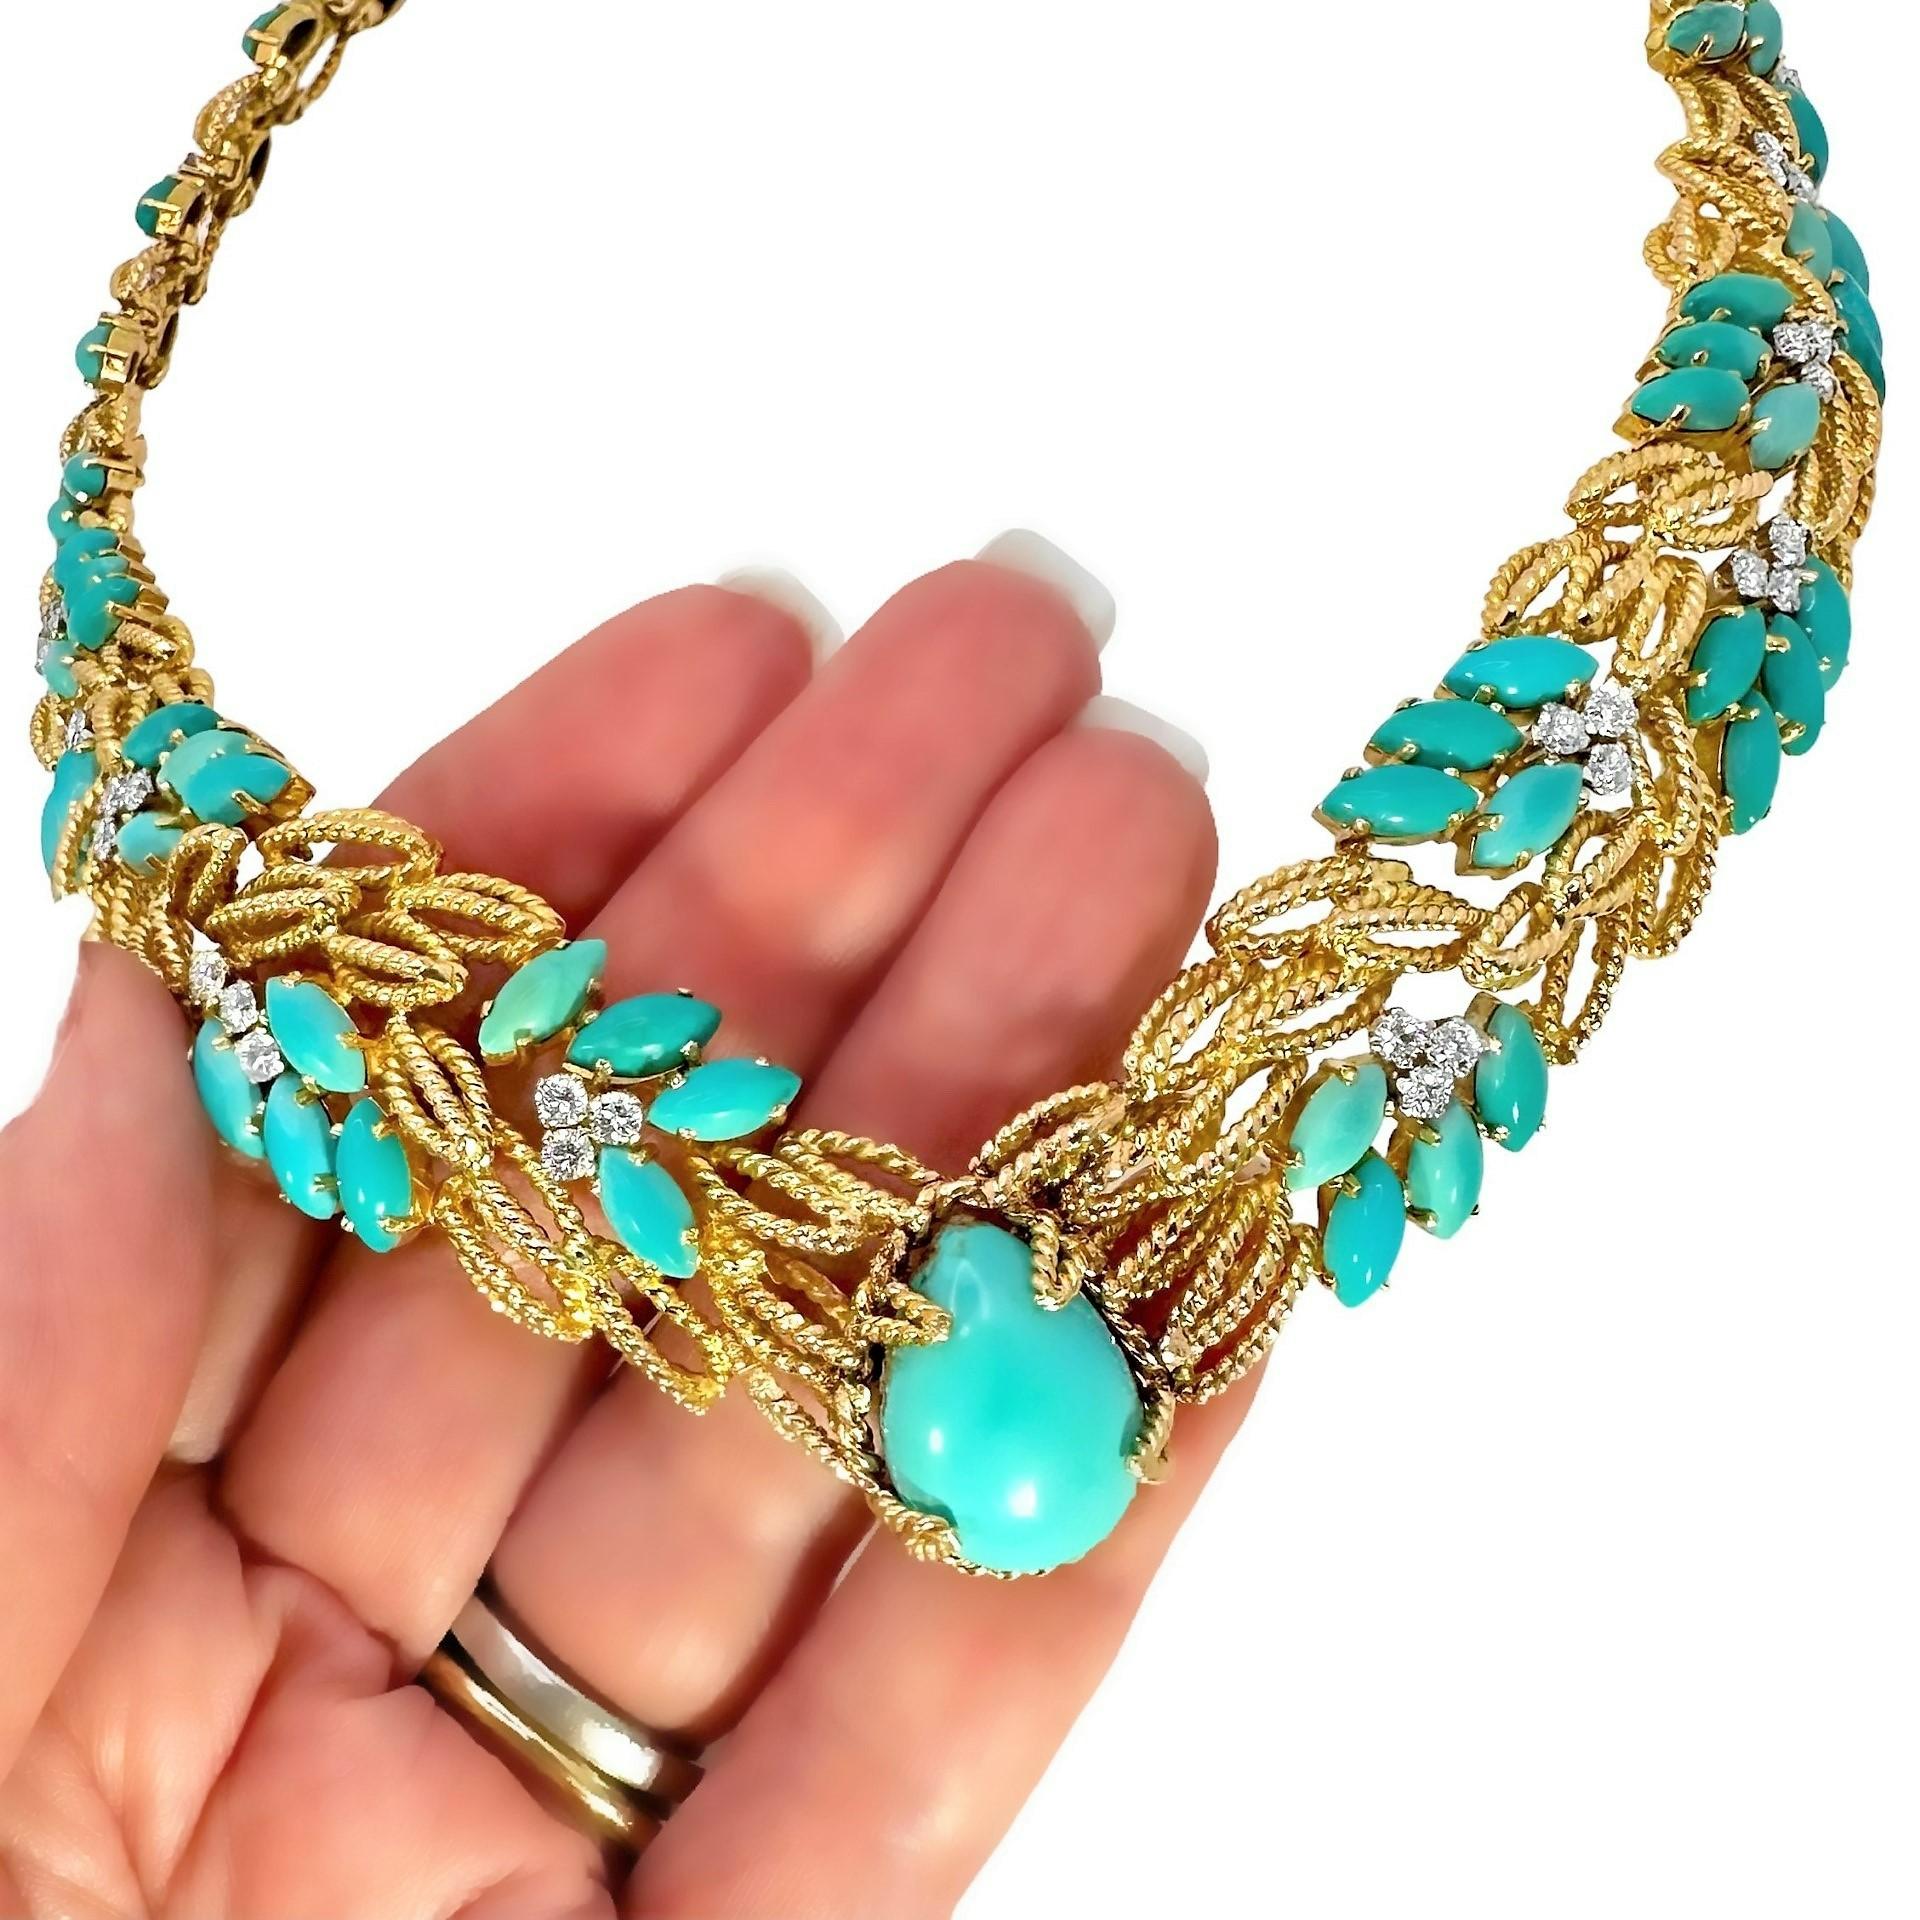 Unique and Lovely Mid-20th Century Cocktail Necklace in Turquoise and Diamonds For Sale 1